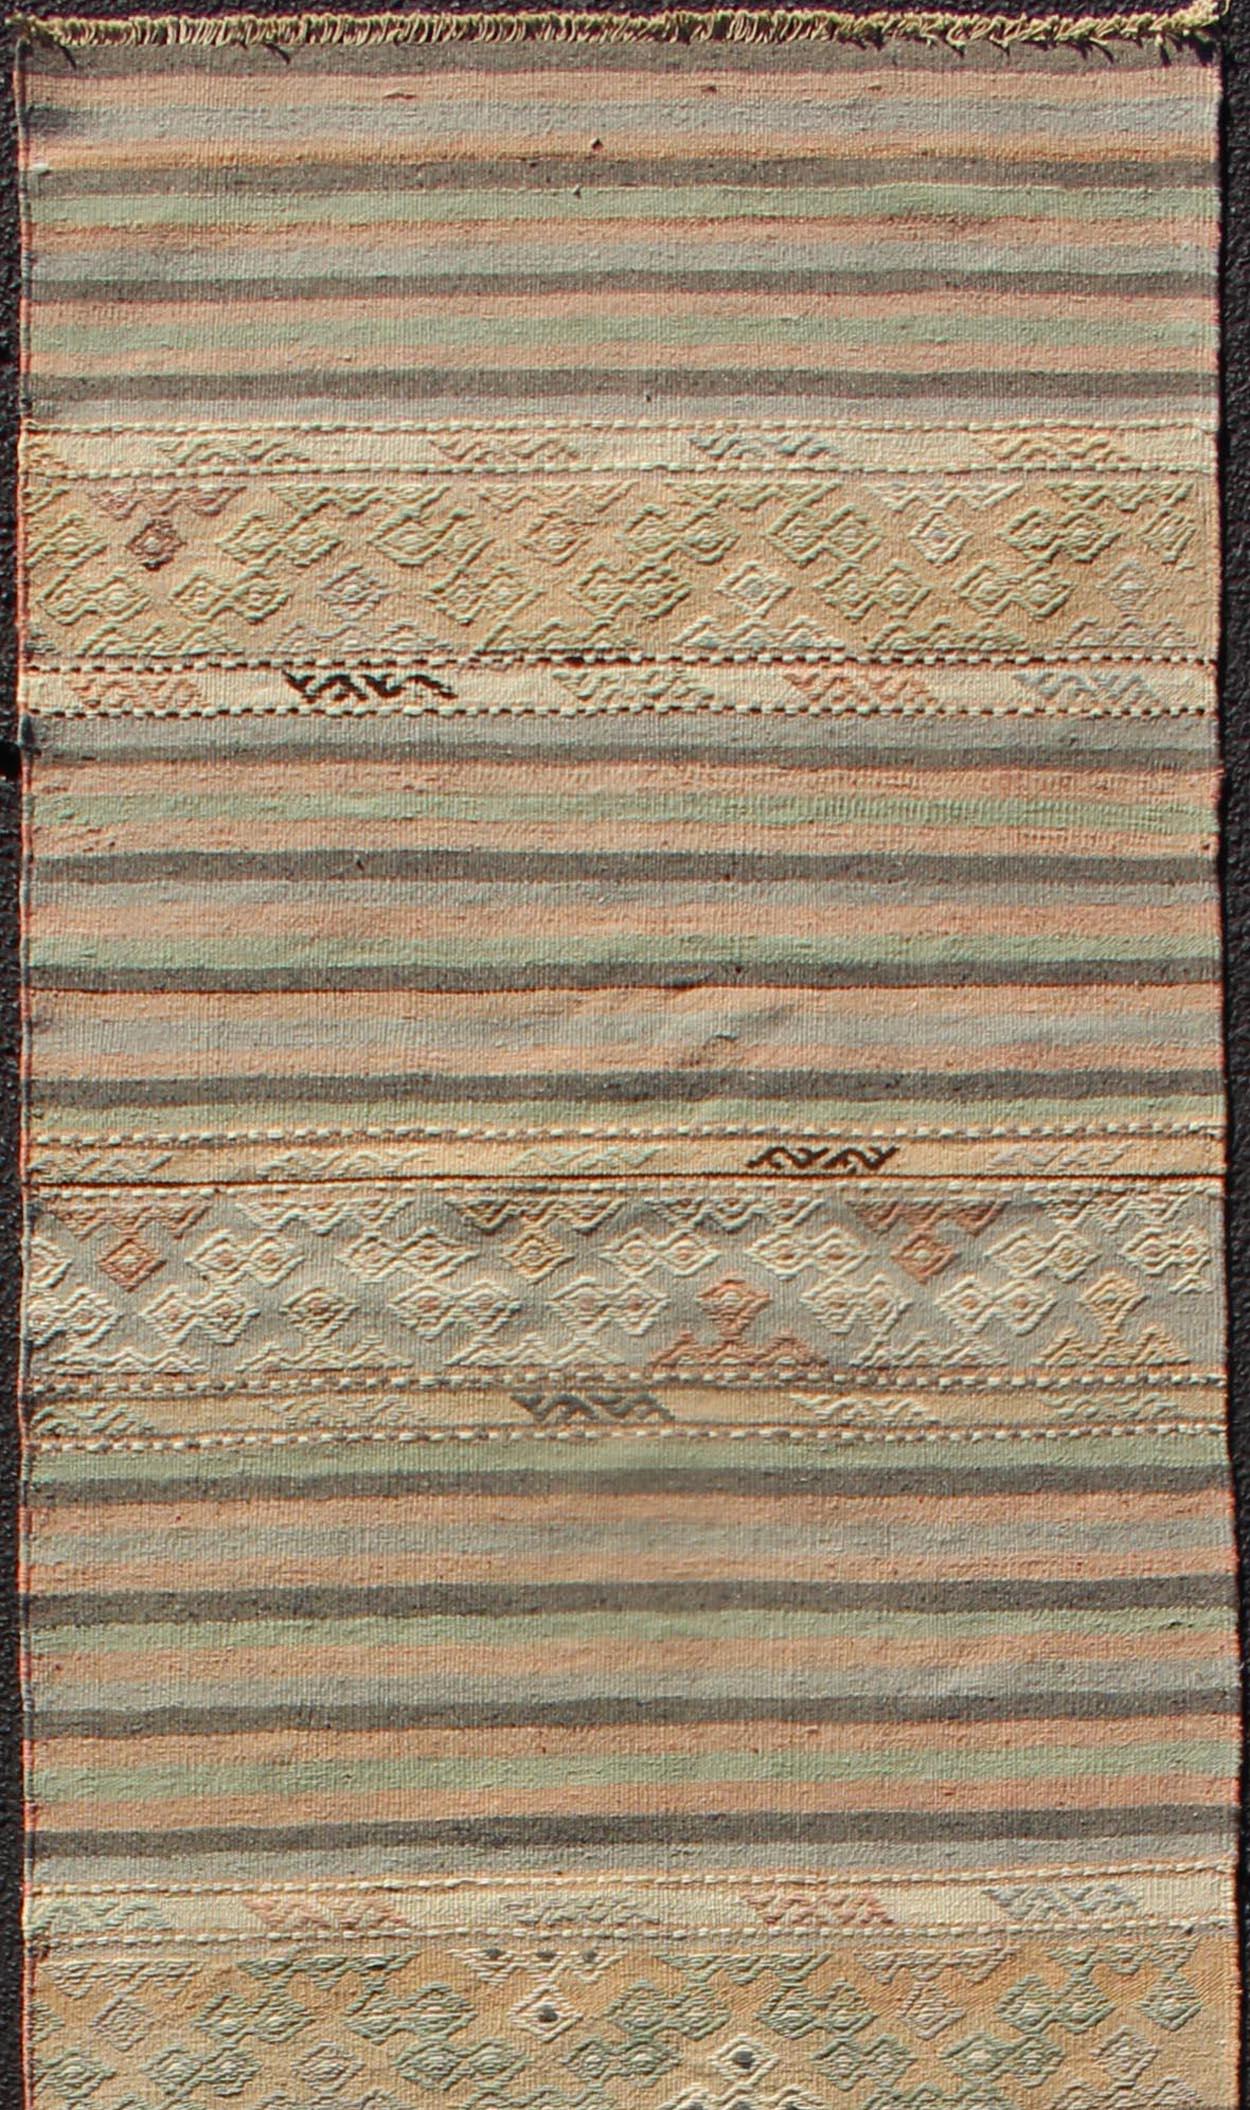 Turkish Kilim vintage carpet in green, tan, orange. Keivan Woven Arts / rug TU-NED-610, country of origin / type: Turkey / Kilim, circa 1950

This Kilim rug from Turkey features a striped design of various geometric patterns rendered in shades of